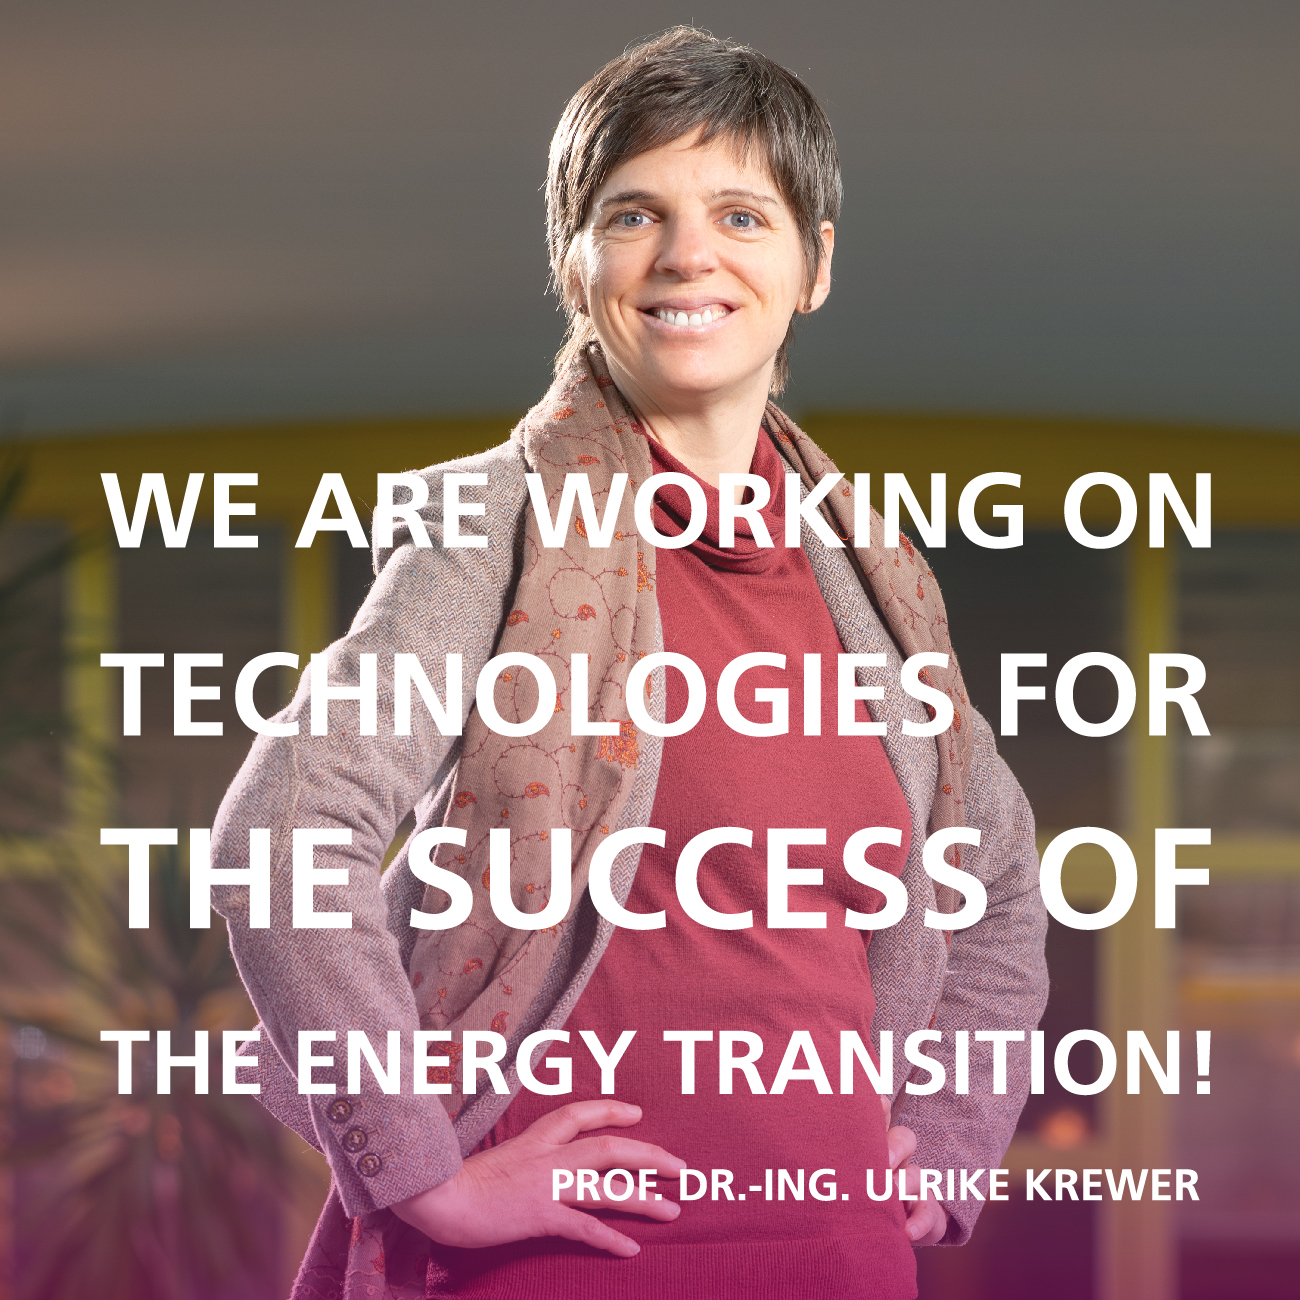 We are working on technologies for the success of the energy transition! Quote by  Prof. Dr.-Ing. Ulrike Krewer, Division 3, KIT